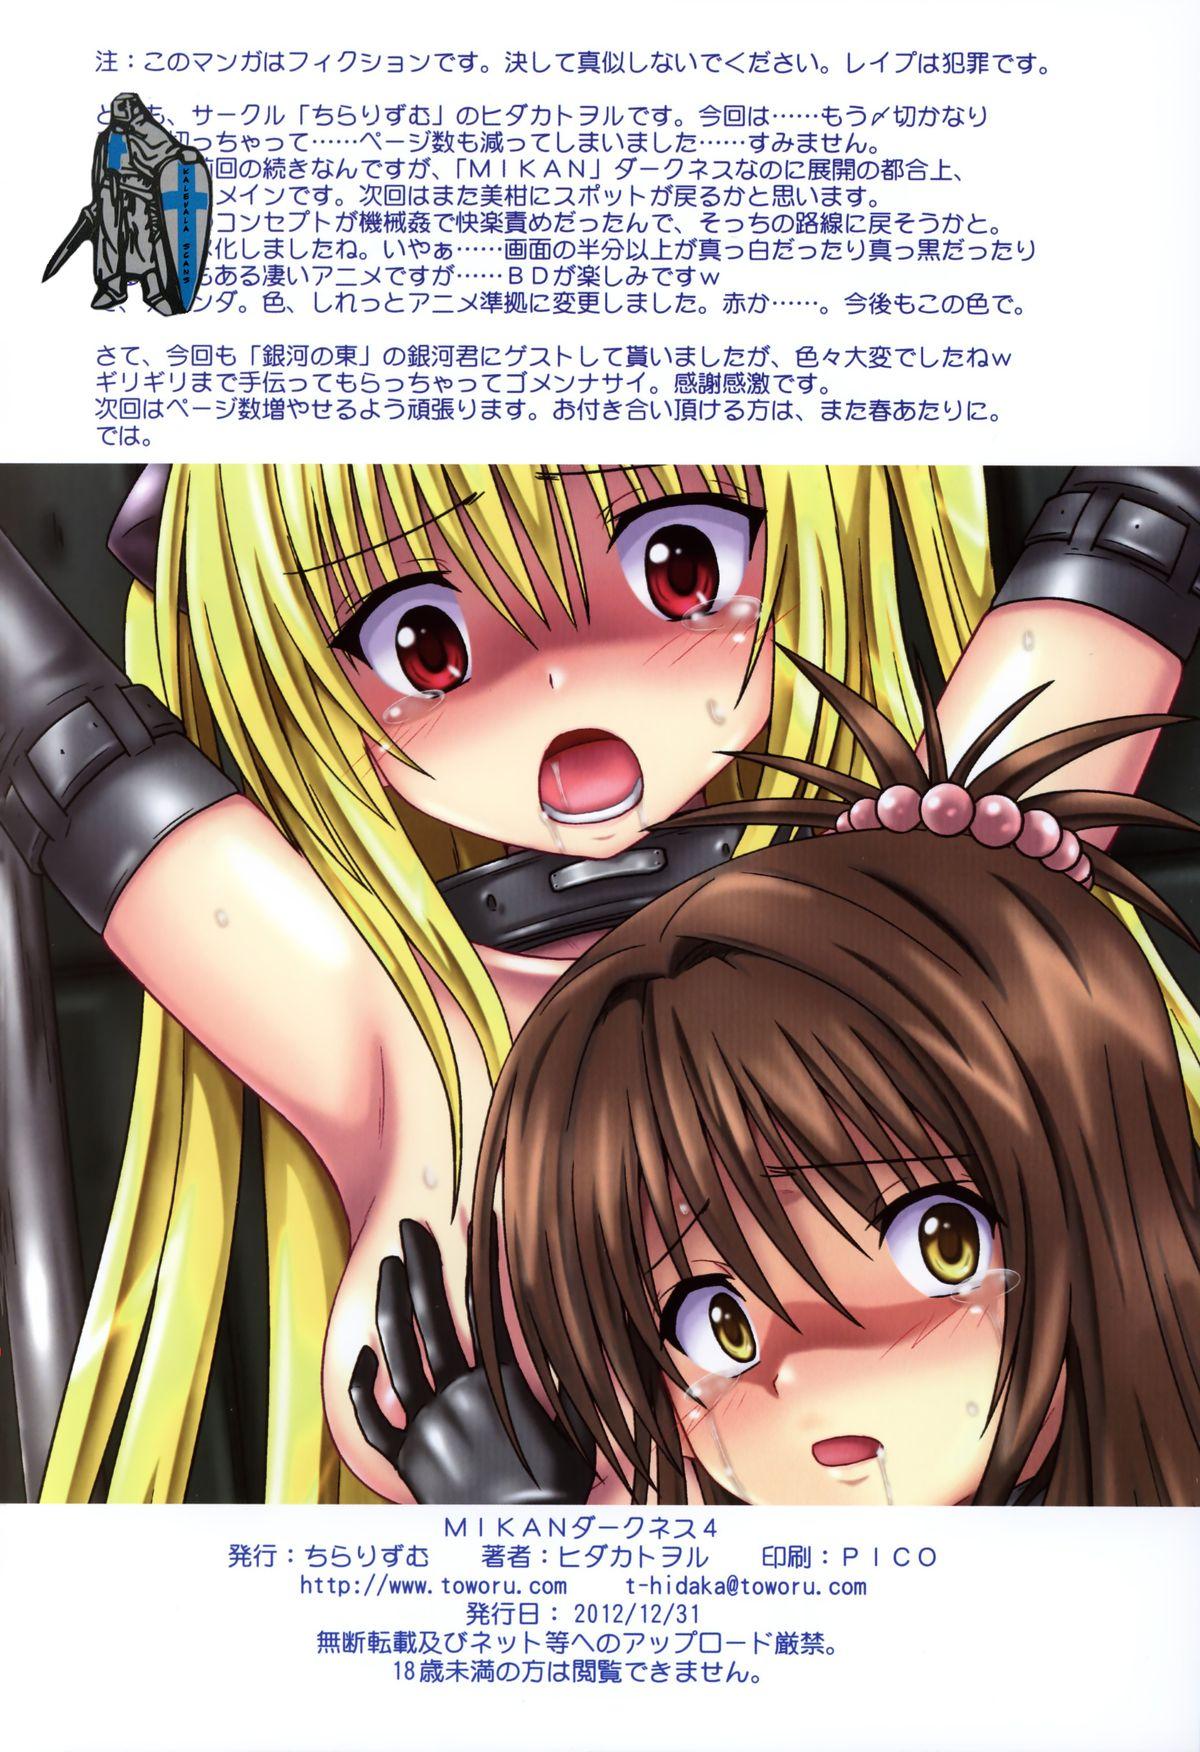 Muscle Mikan Darkness 4 - To love-ru Closeups - Page 17